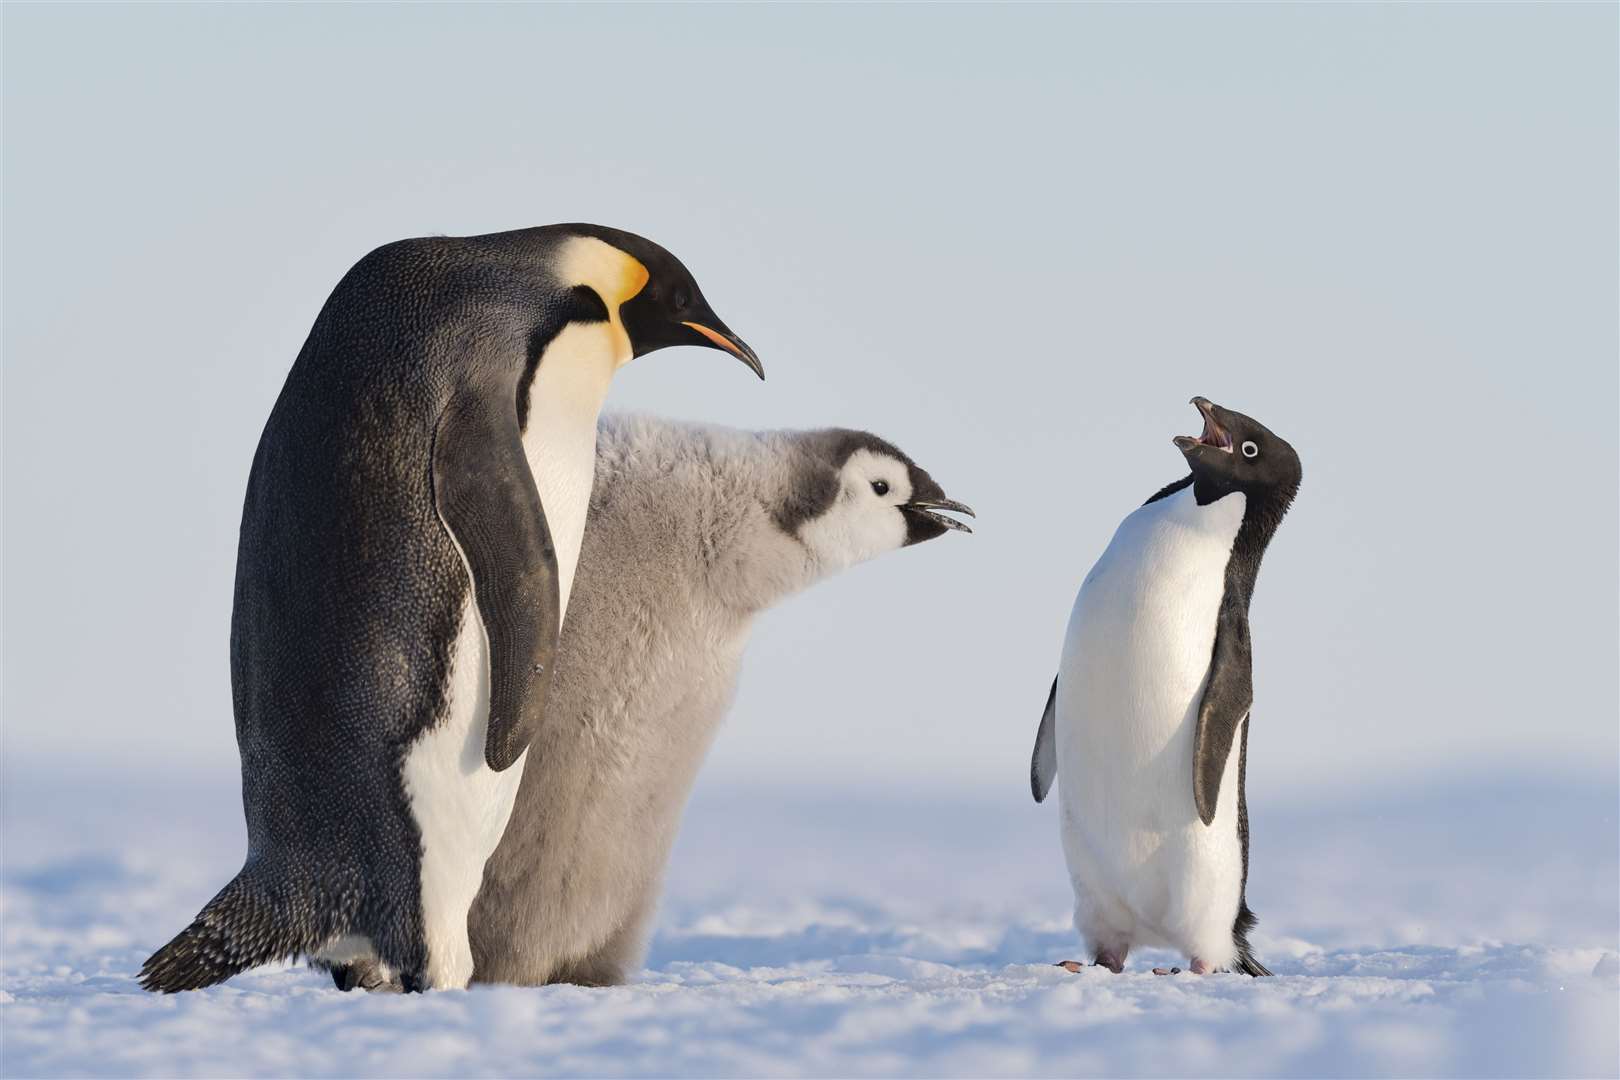 An Adelie penguin approaches an emperor penguin and its chick during feeding time in Antarctica’s Atka Bay (Stefan Christmann/Wildlife Photographer of the Year/PA)